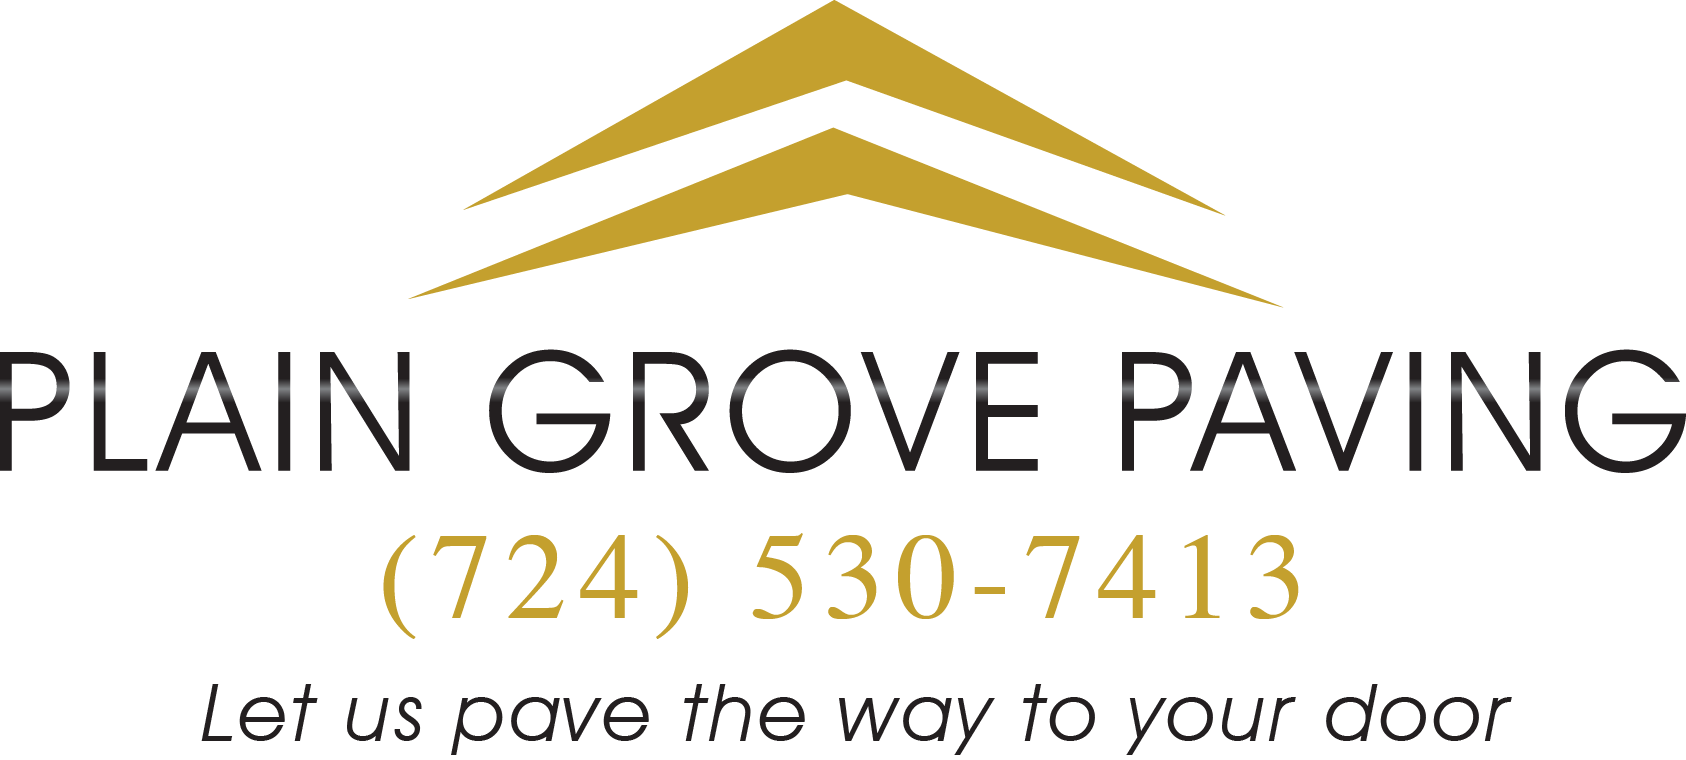 Plain Grove Paving – Western Pennsylvania Paving and Asphalt Services offering asphalt paving services in slippery rock, mercer and surround areas. 